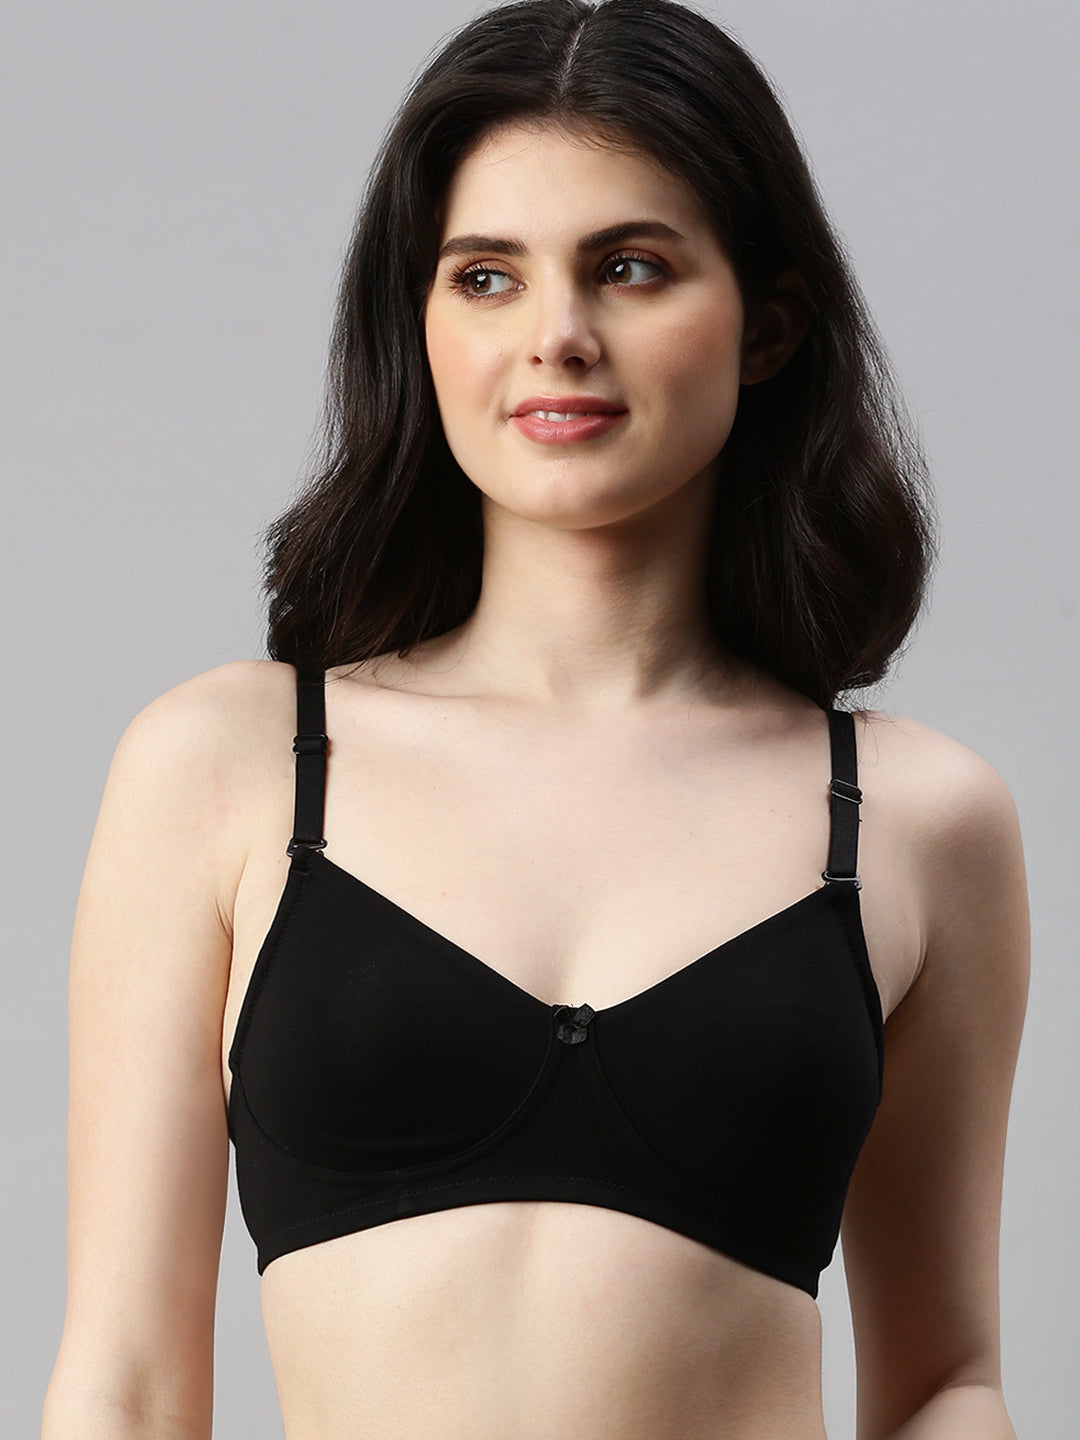 Get a Perfect Fit with Prisma's Royal Blue Moulded Encircle Bra